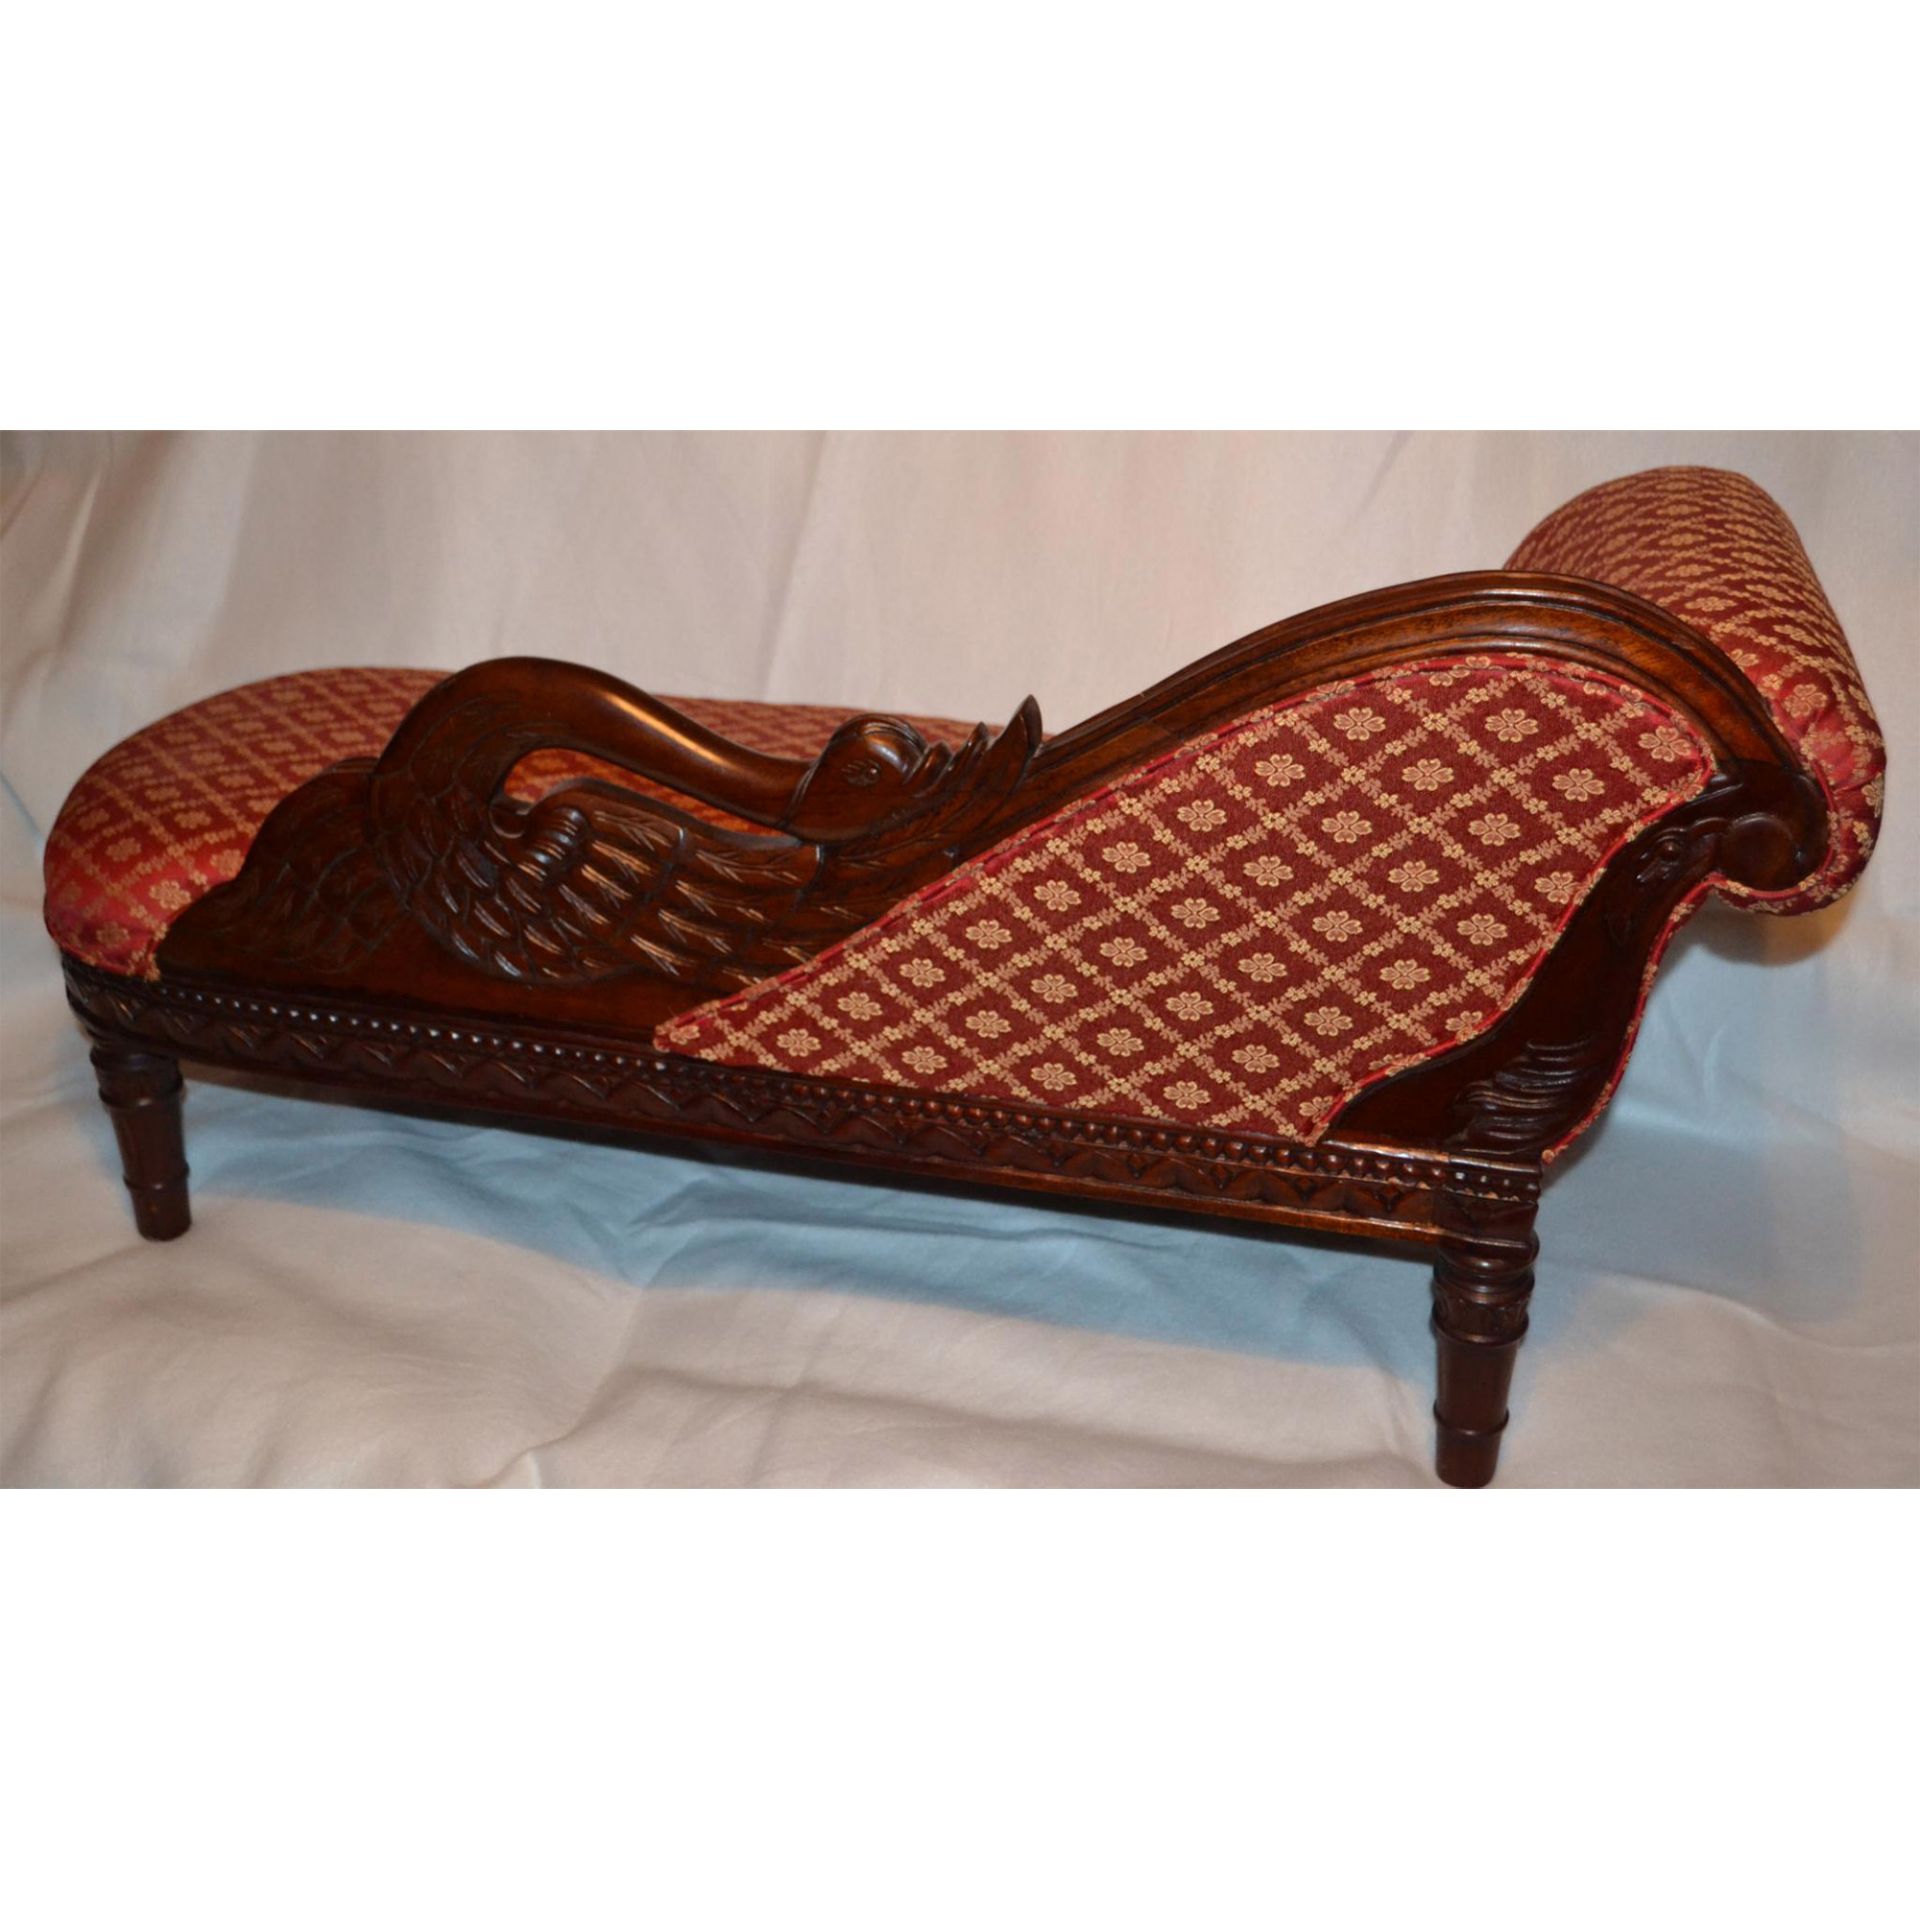 Miniature European Mahogany Hand Carved And Crafted Swan Sofa, Upholstered In Red/Gold Pattern Damas - Bild 2 aus 5